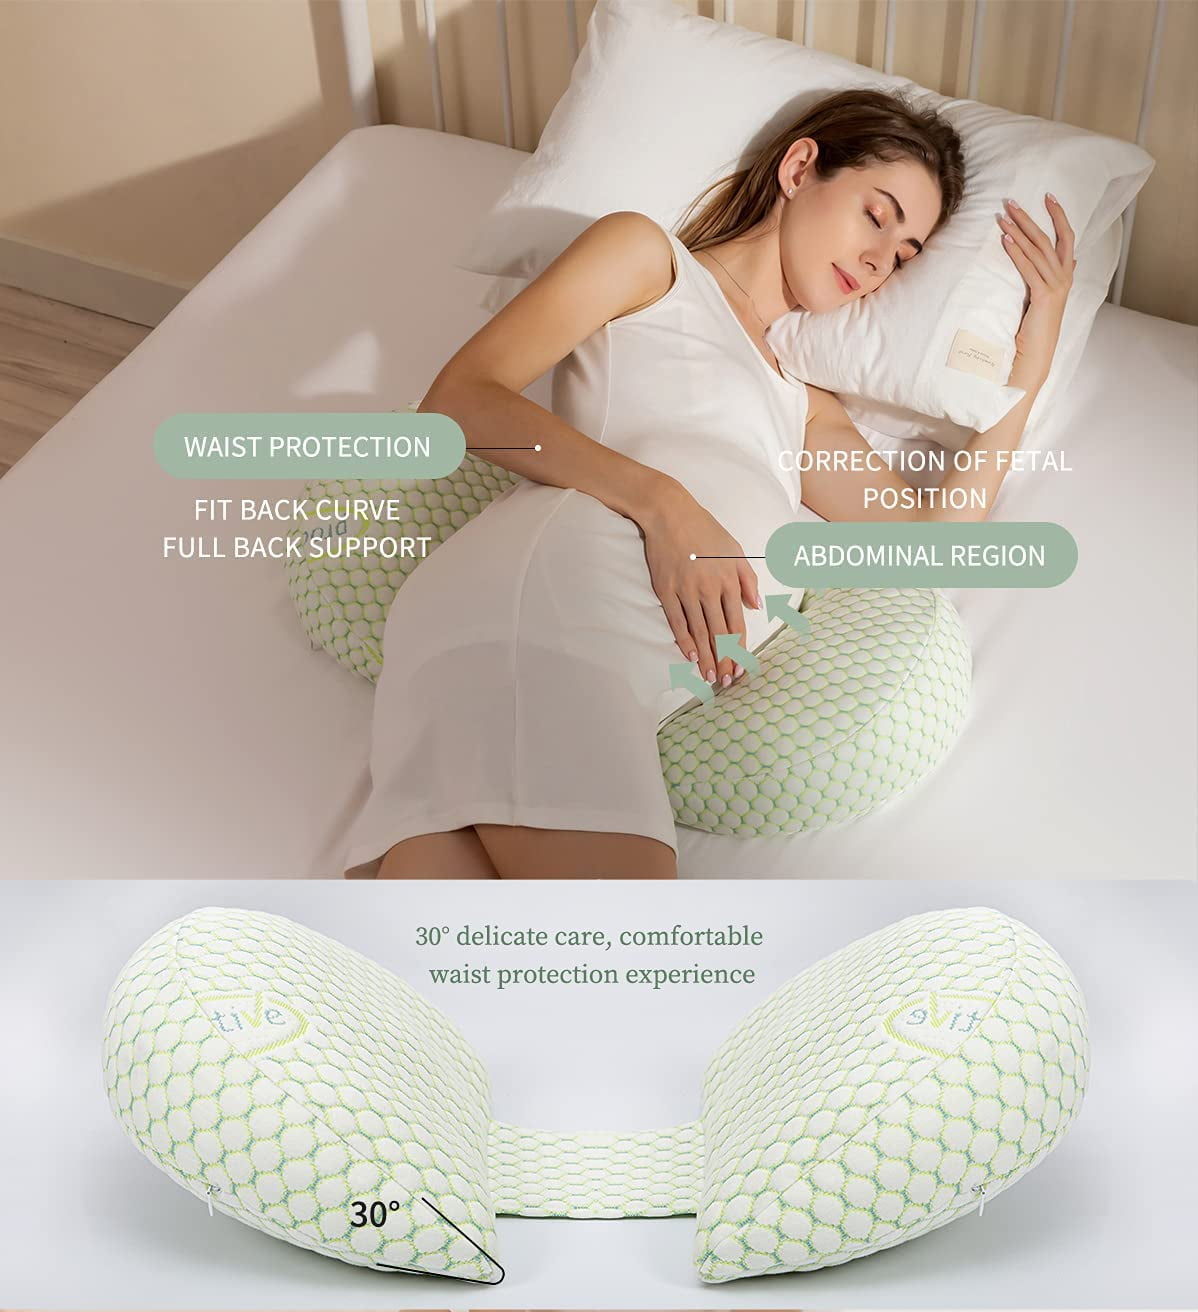 napz Pregnancy Pillows, Maternity Pillow Support for Backs, Hips, Legs,  Belly, Pregnancy Must Haves, Soft Body Pillow for Pregnant Women and Baby  with